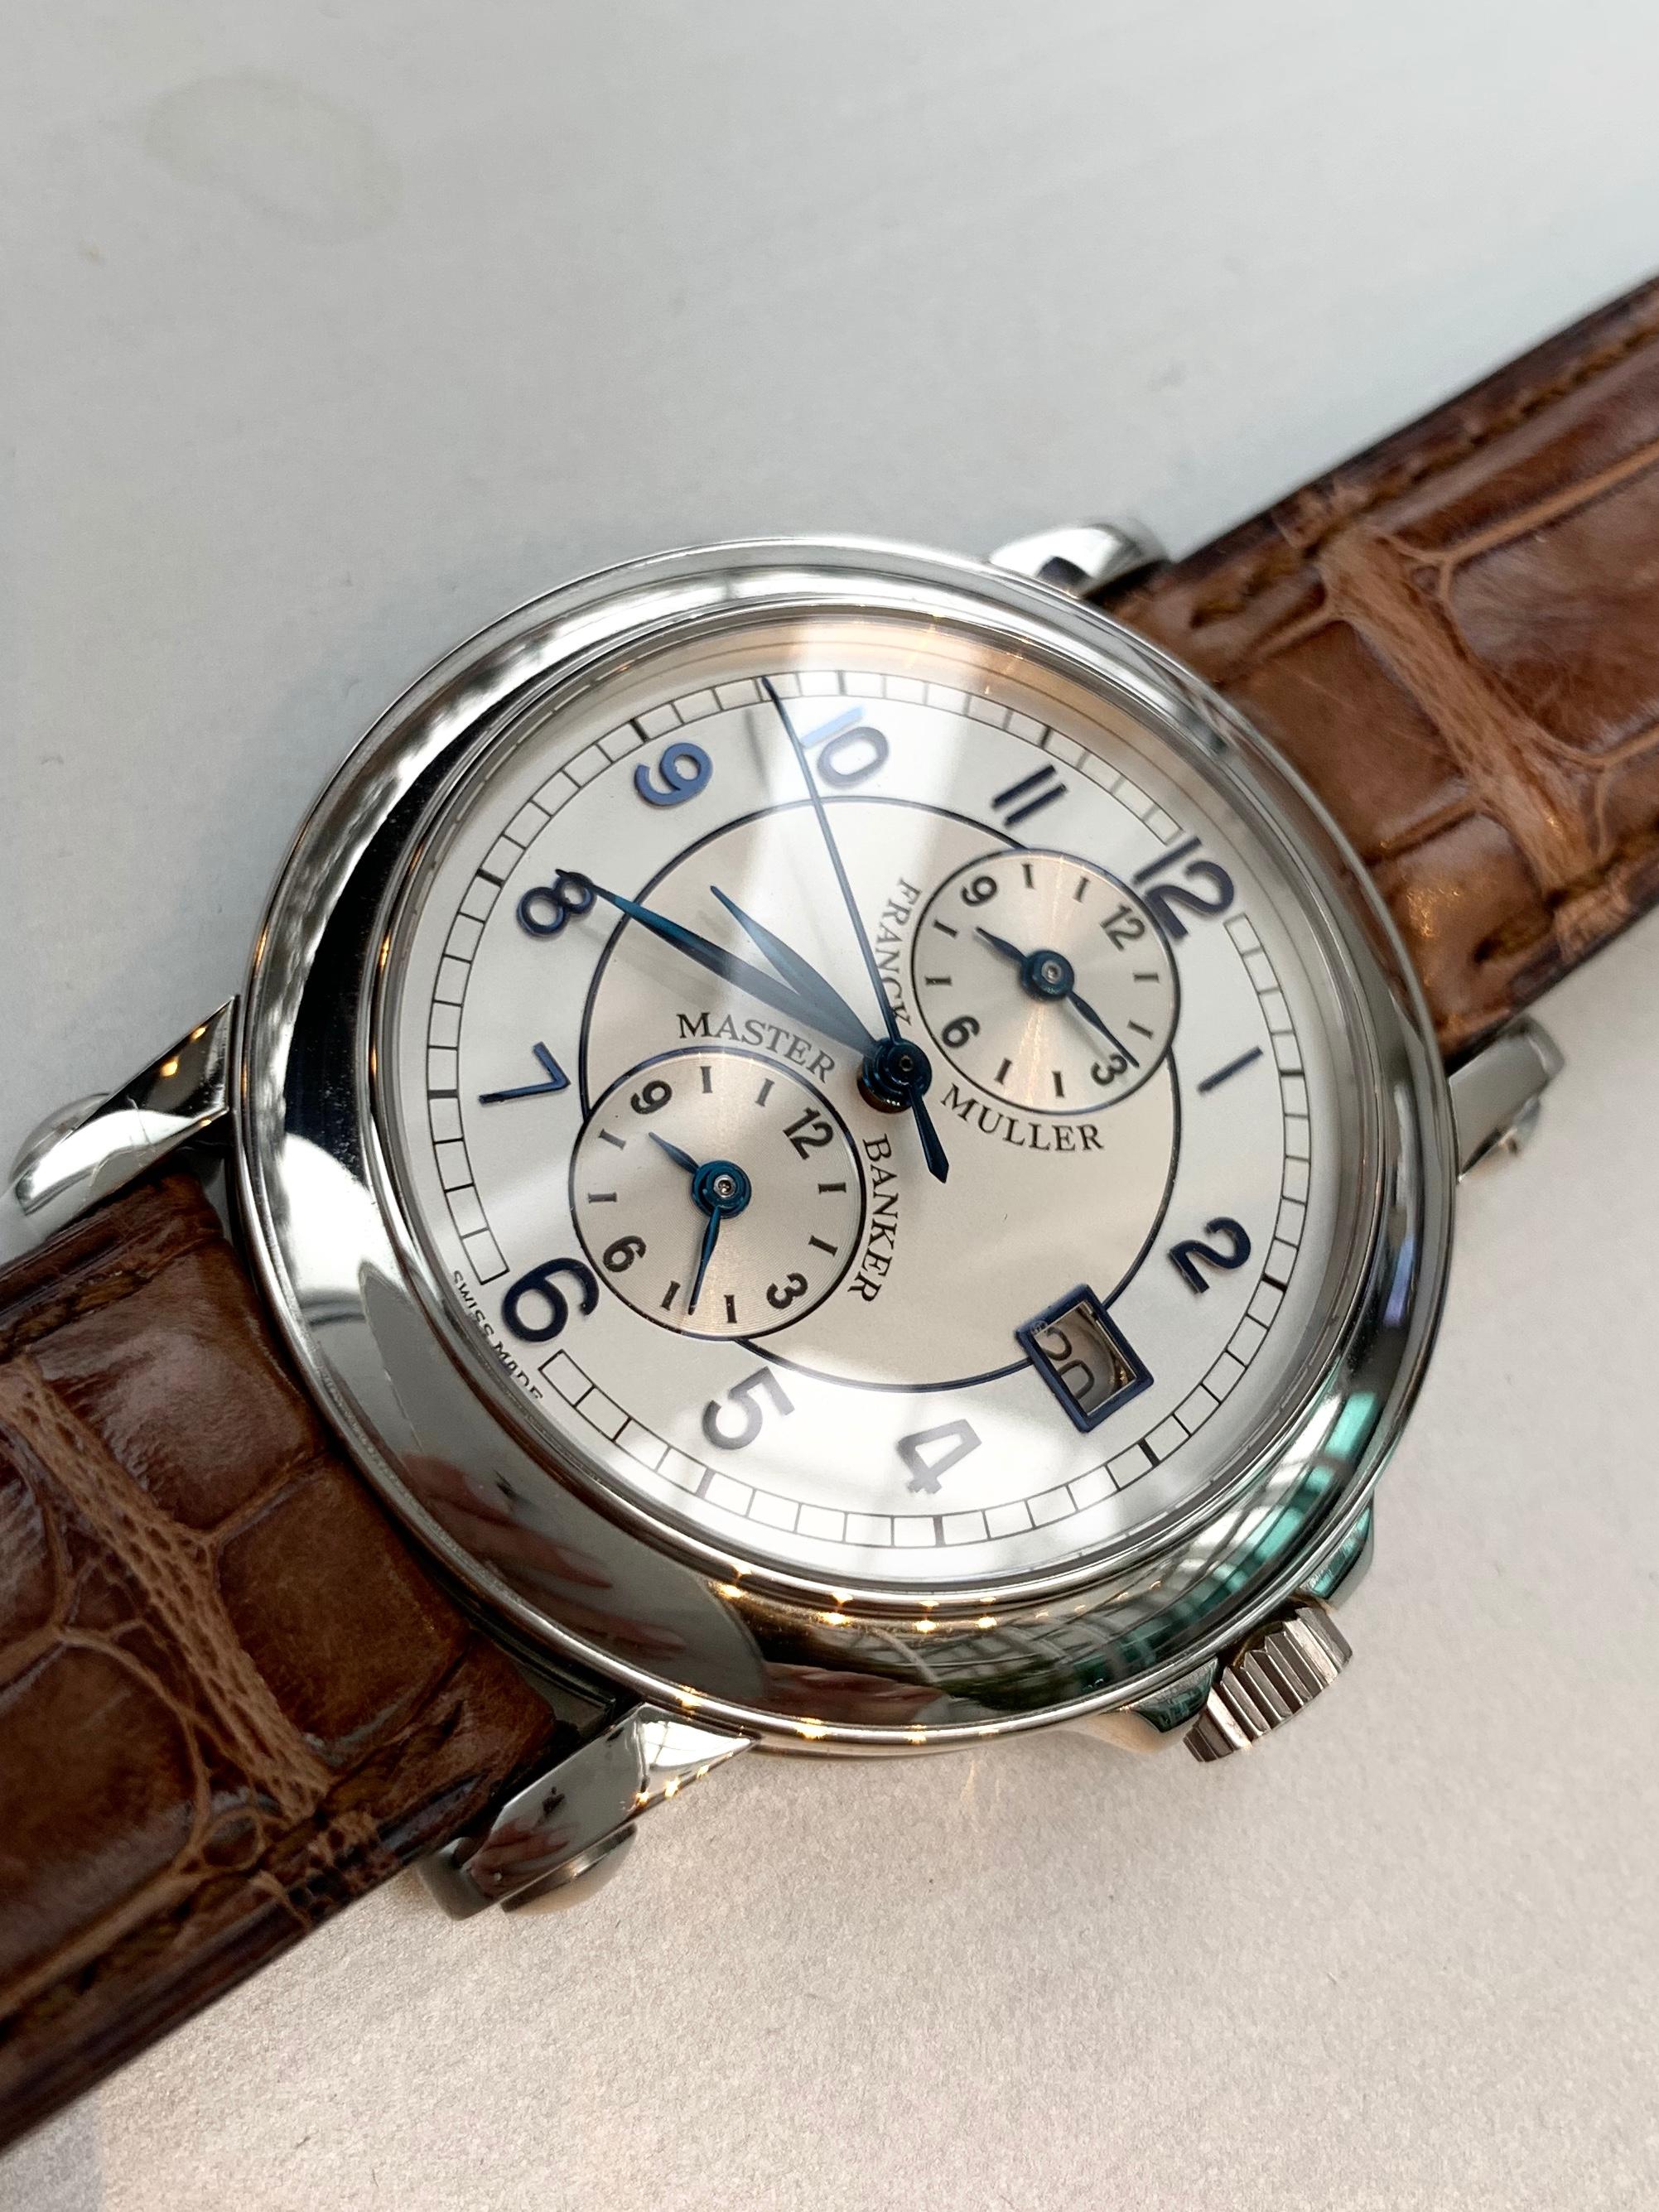 Contemporary Franck Muller Master Banker Round Watch on Leather Strap